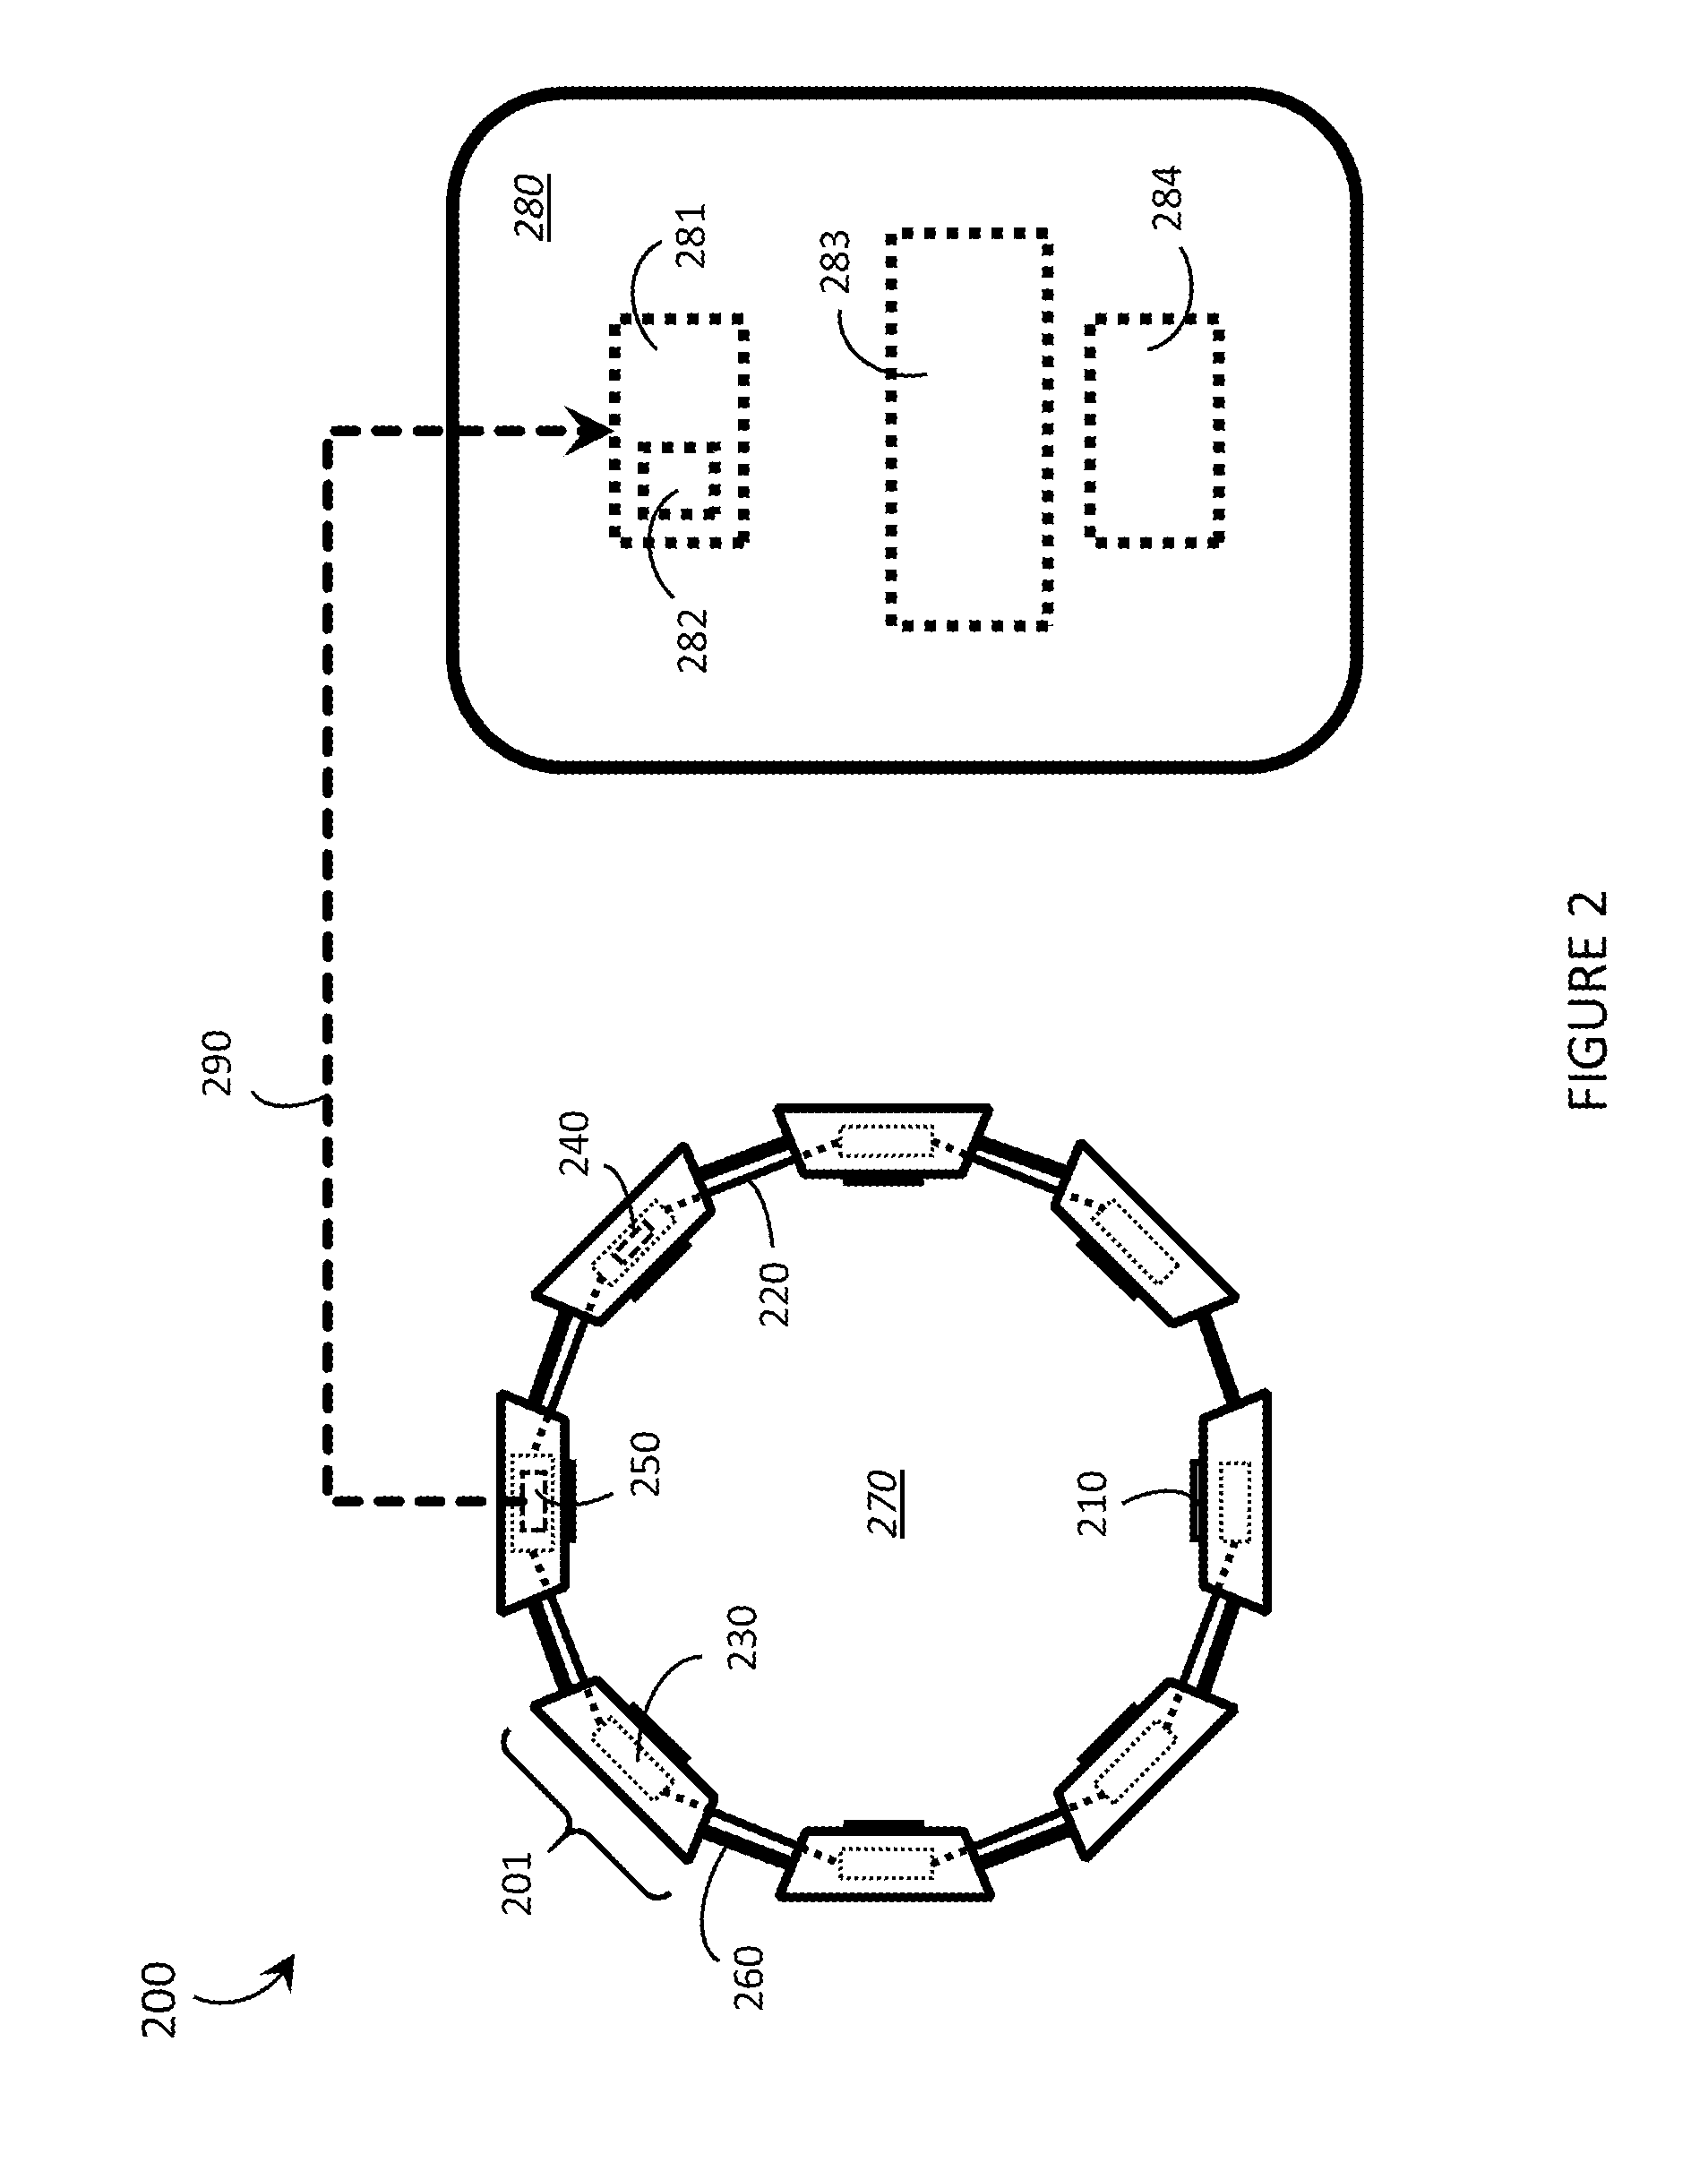 Systems, articles, and methods for human-electronics interfaces